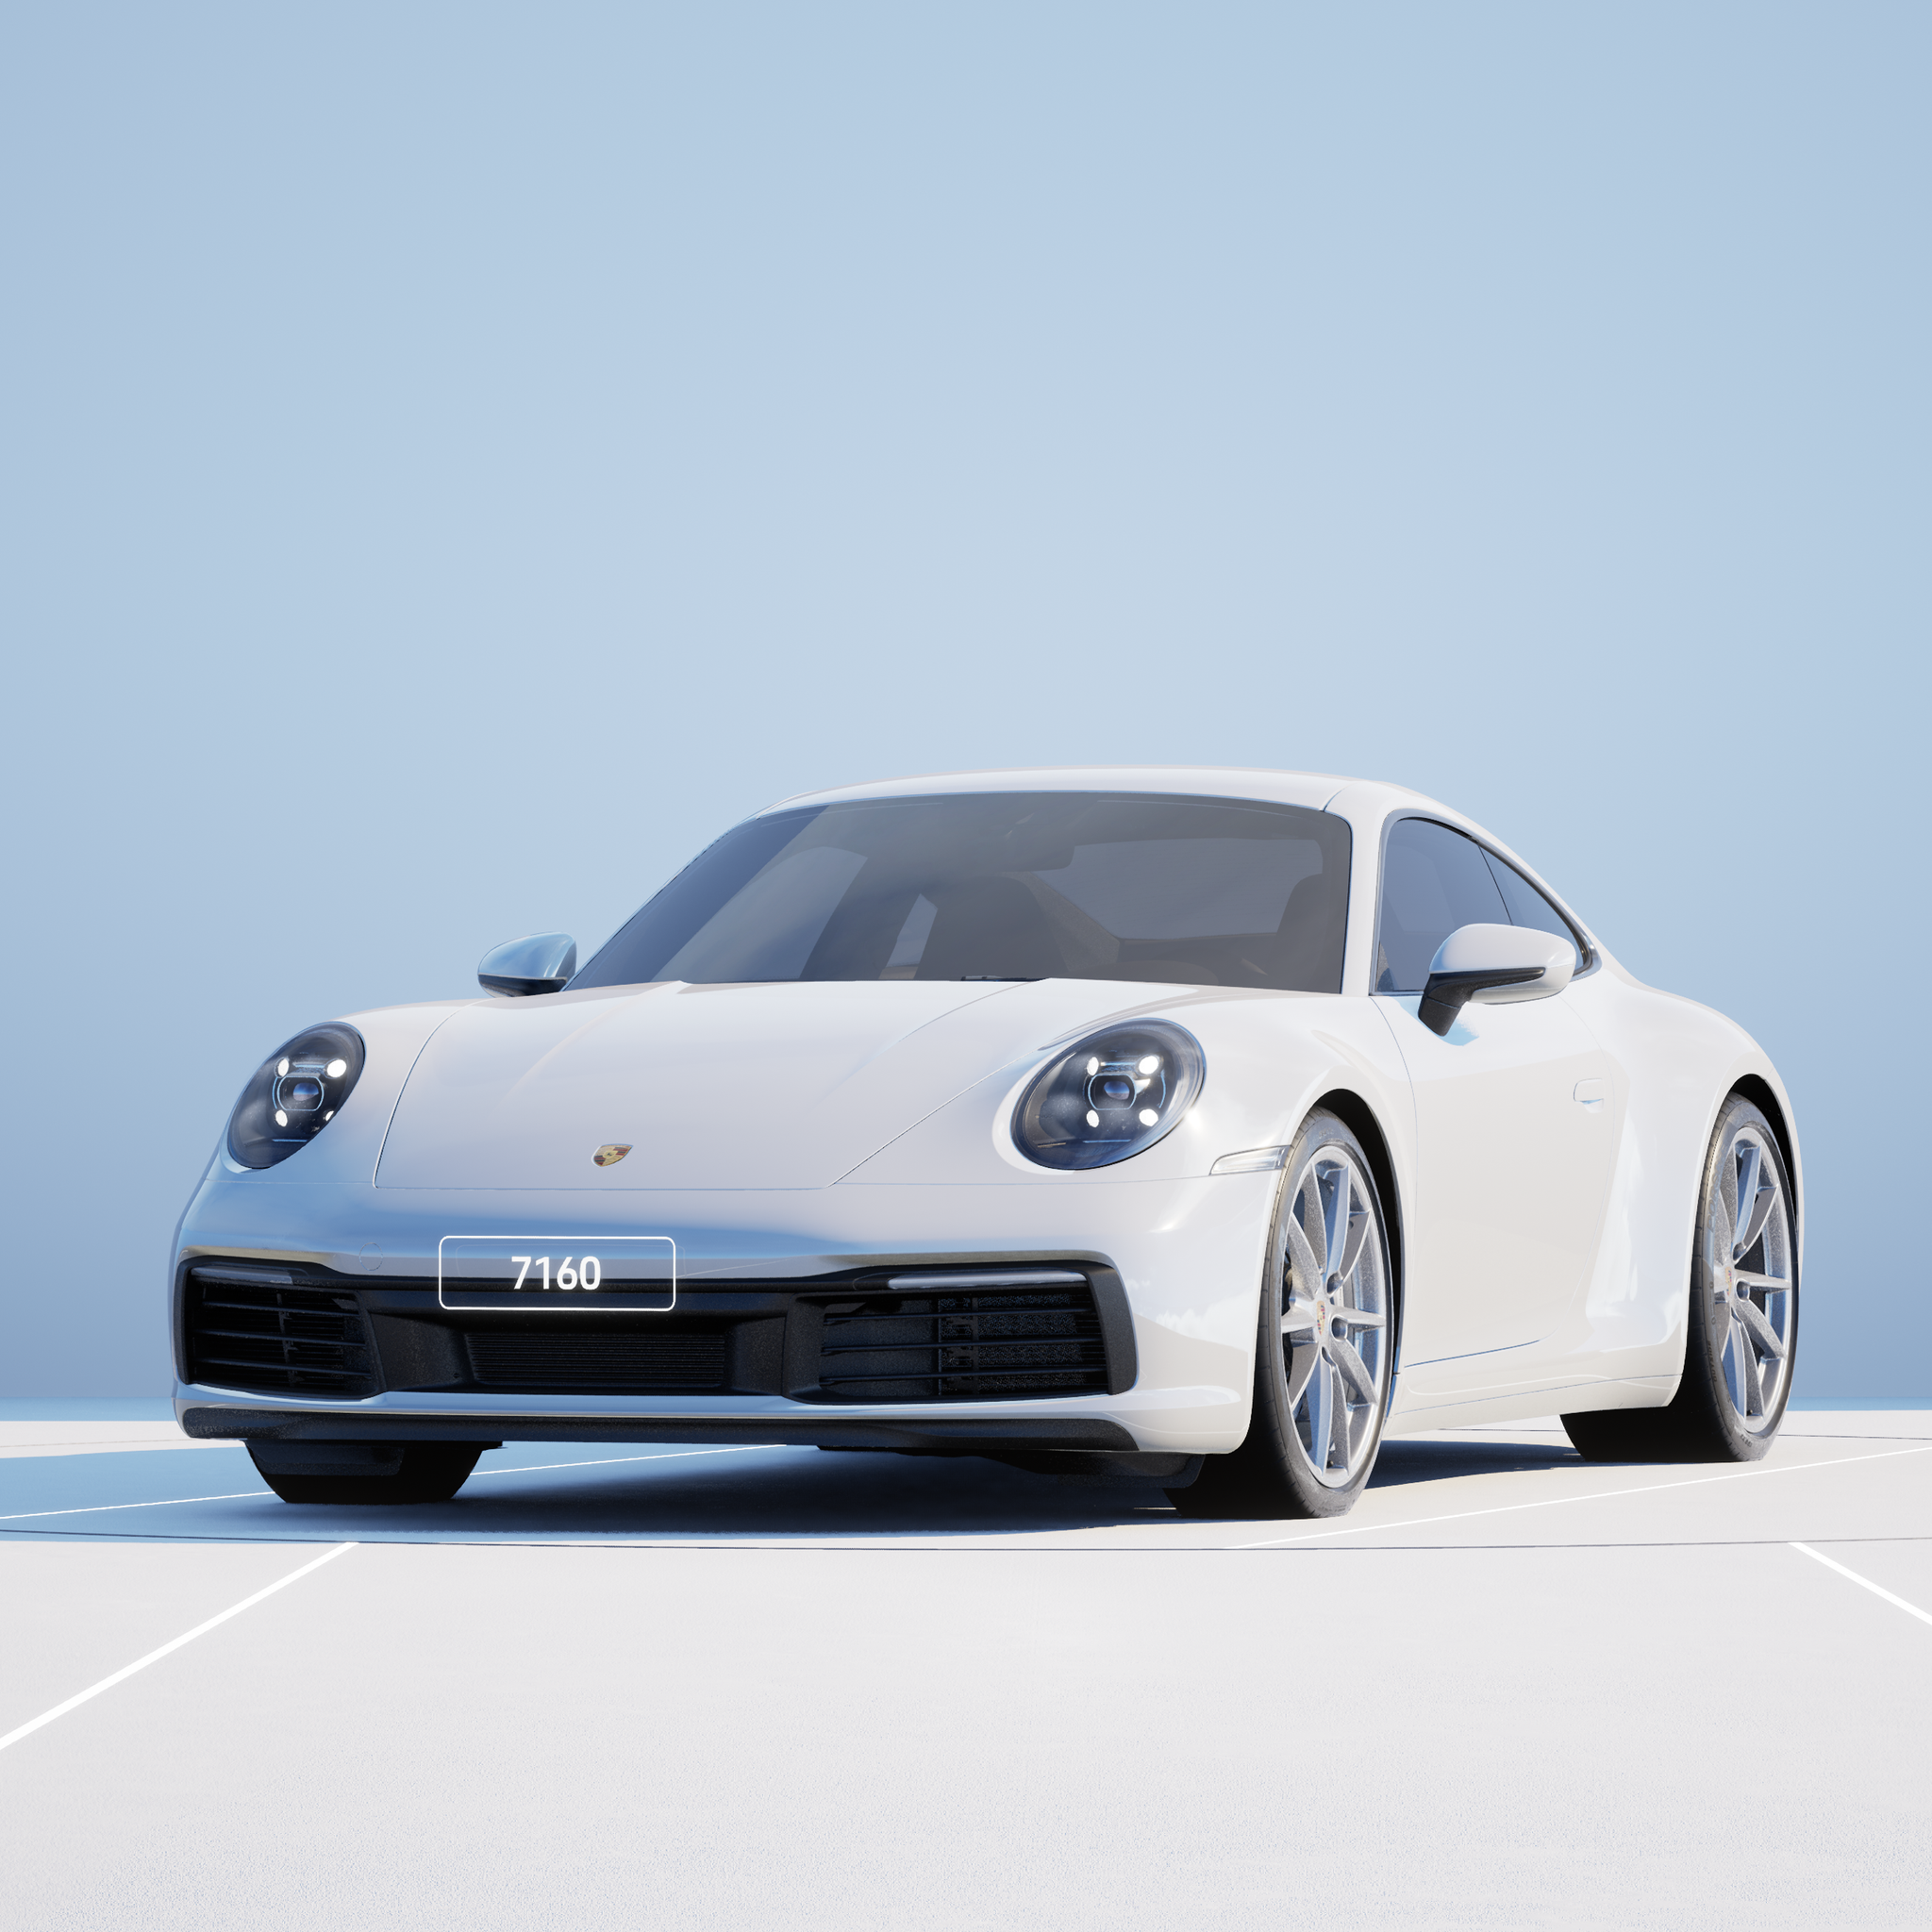 The PORSCHΞ 911 7160 image in phase